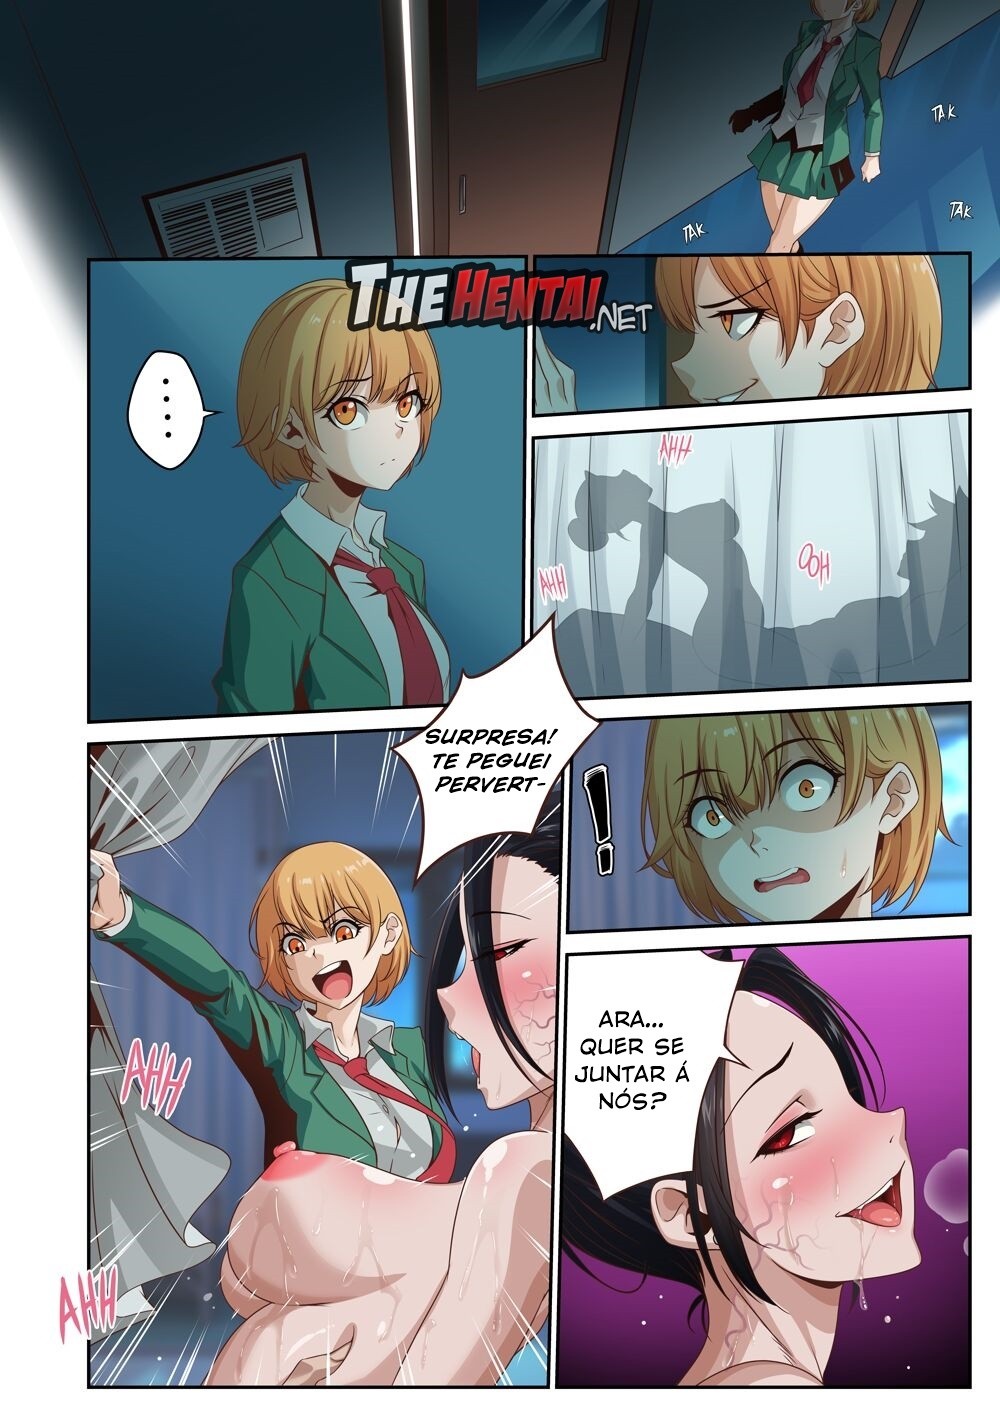 The Spread Part 3 Hentai pt-br 15